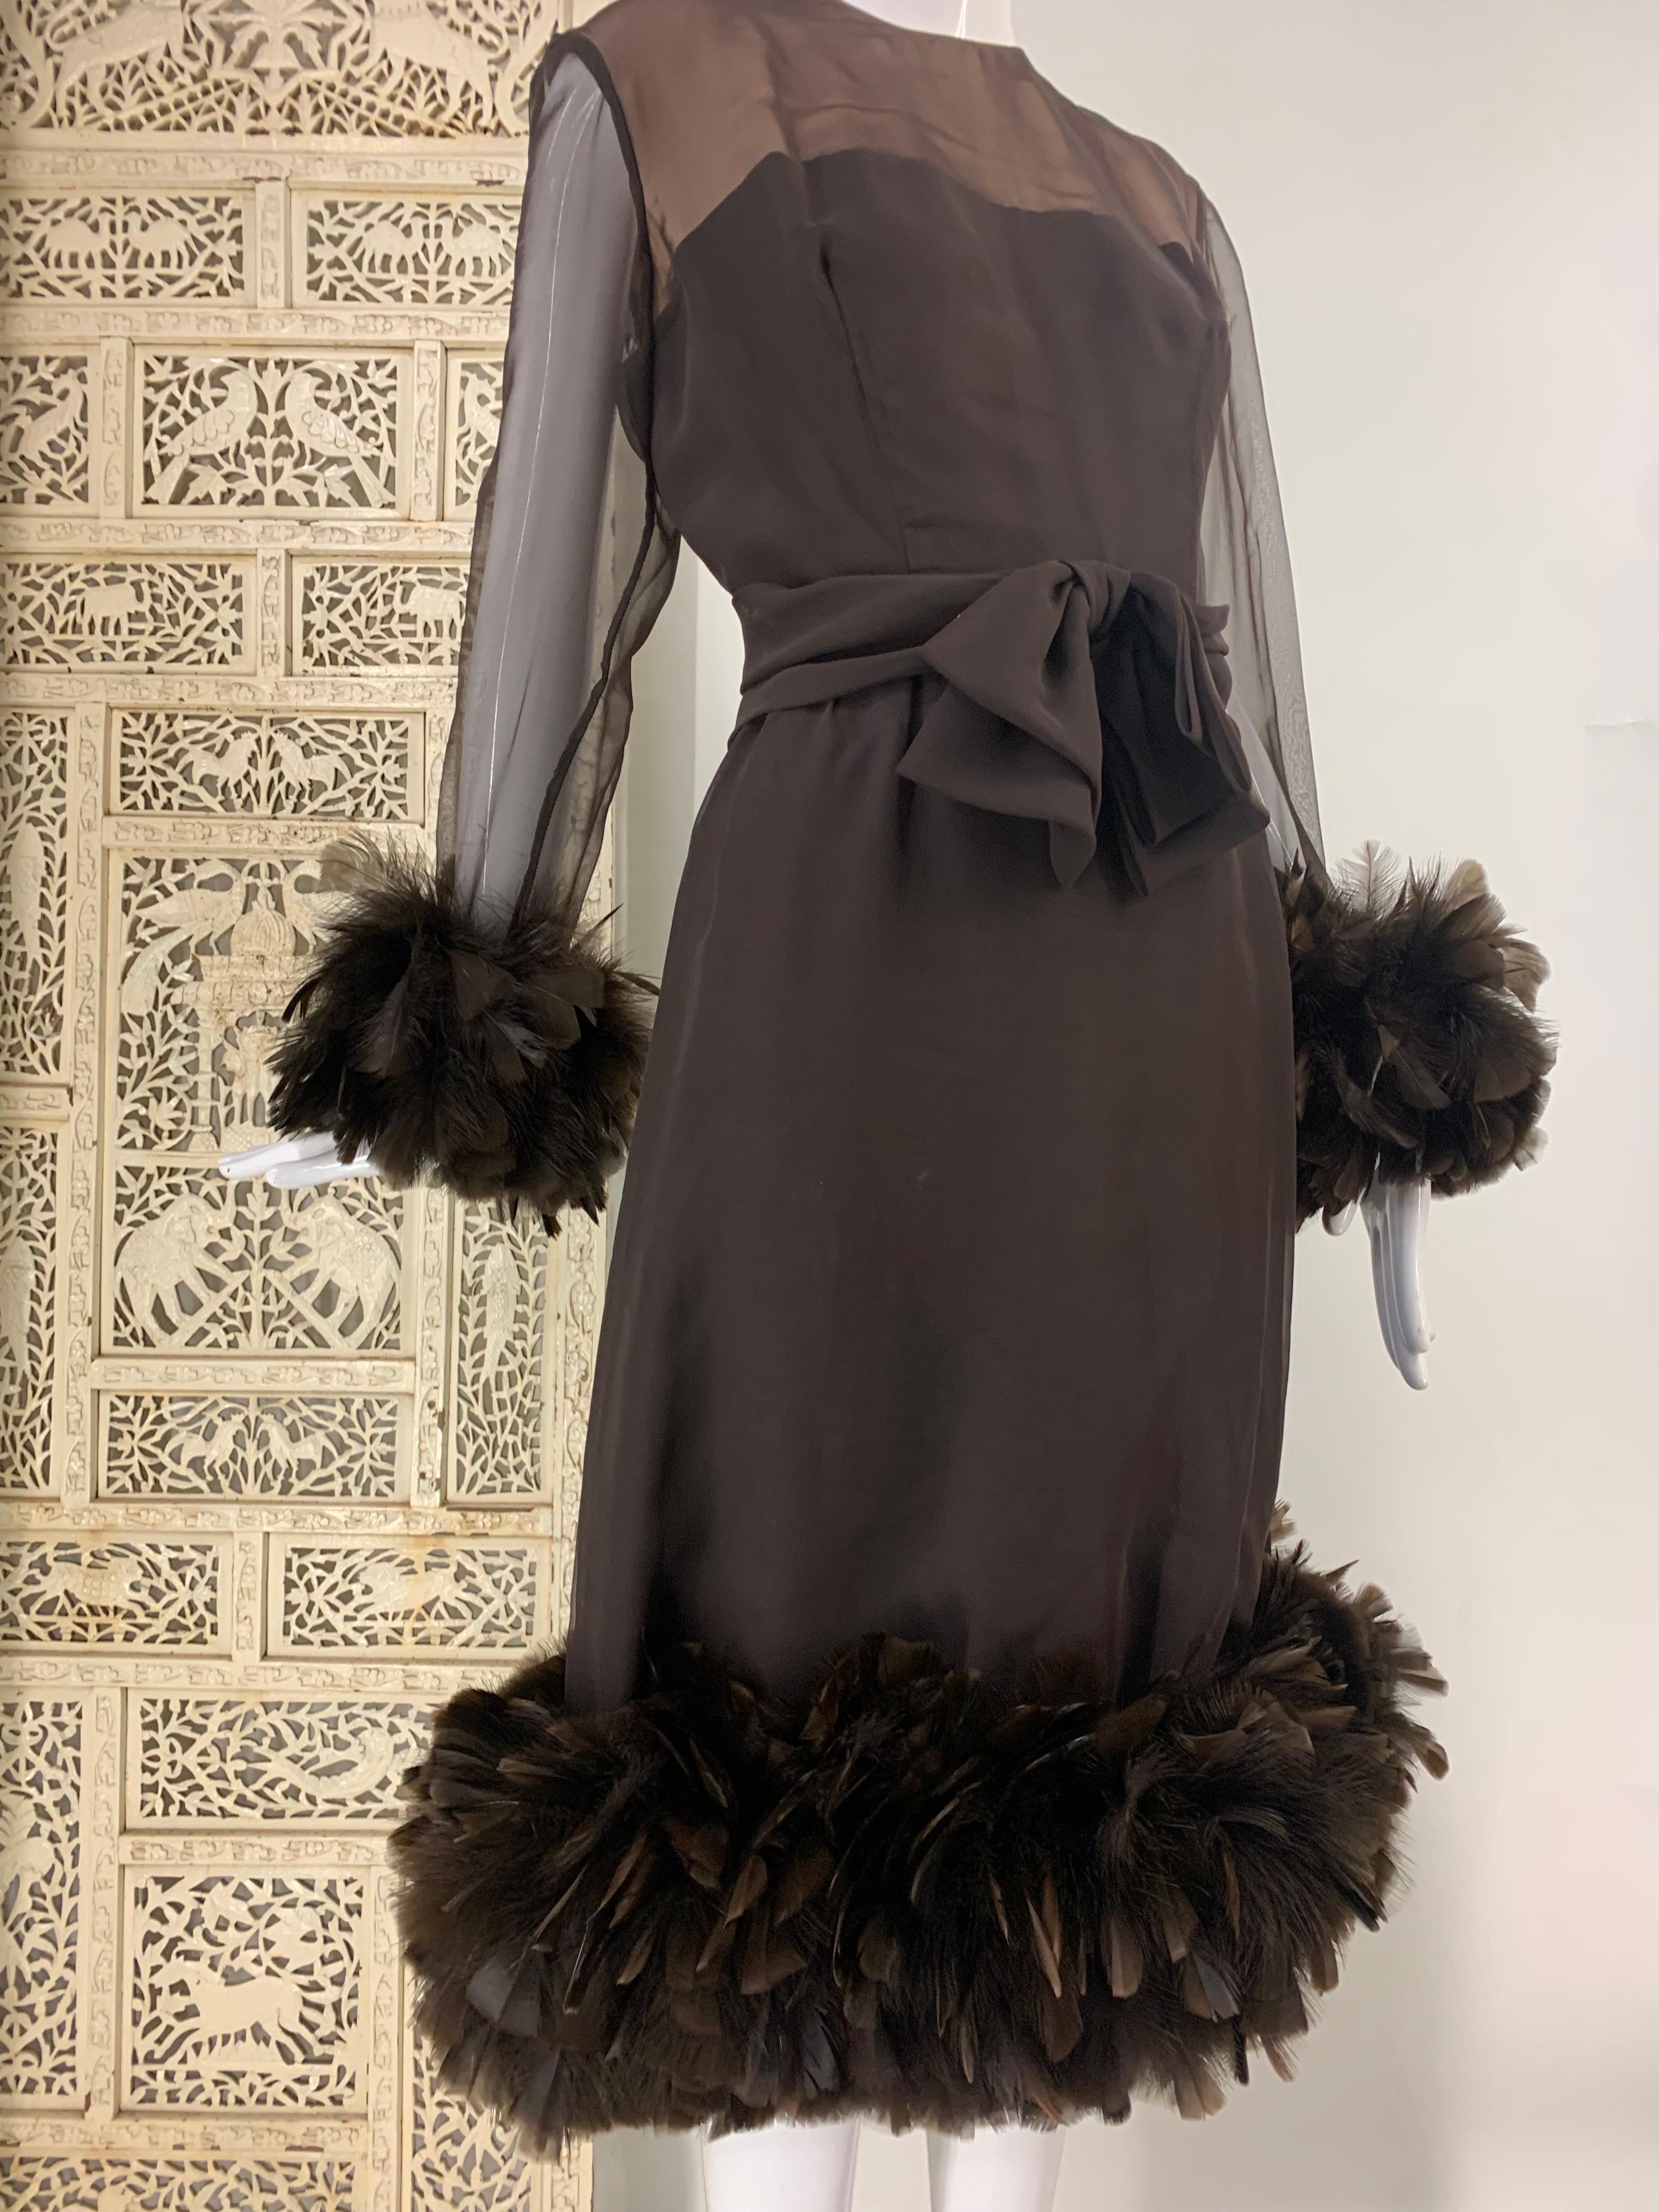 1960s Anita Modes Chocolate Chiffon and Crepe Dress w Turkey Feather Trim: Fashioned for tall girls, lined décolletage with a full flourished bow at front waist. Flirty chocolate brown turkey feather cuffs and hem.  Full back zipper.  US size 8-10